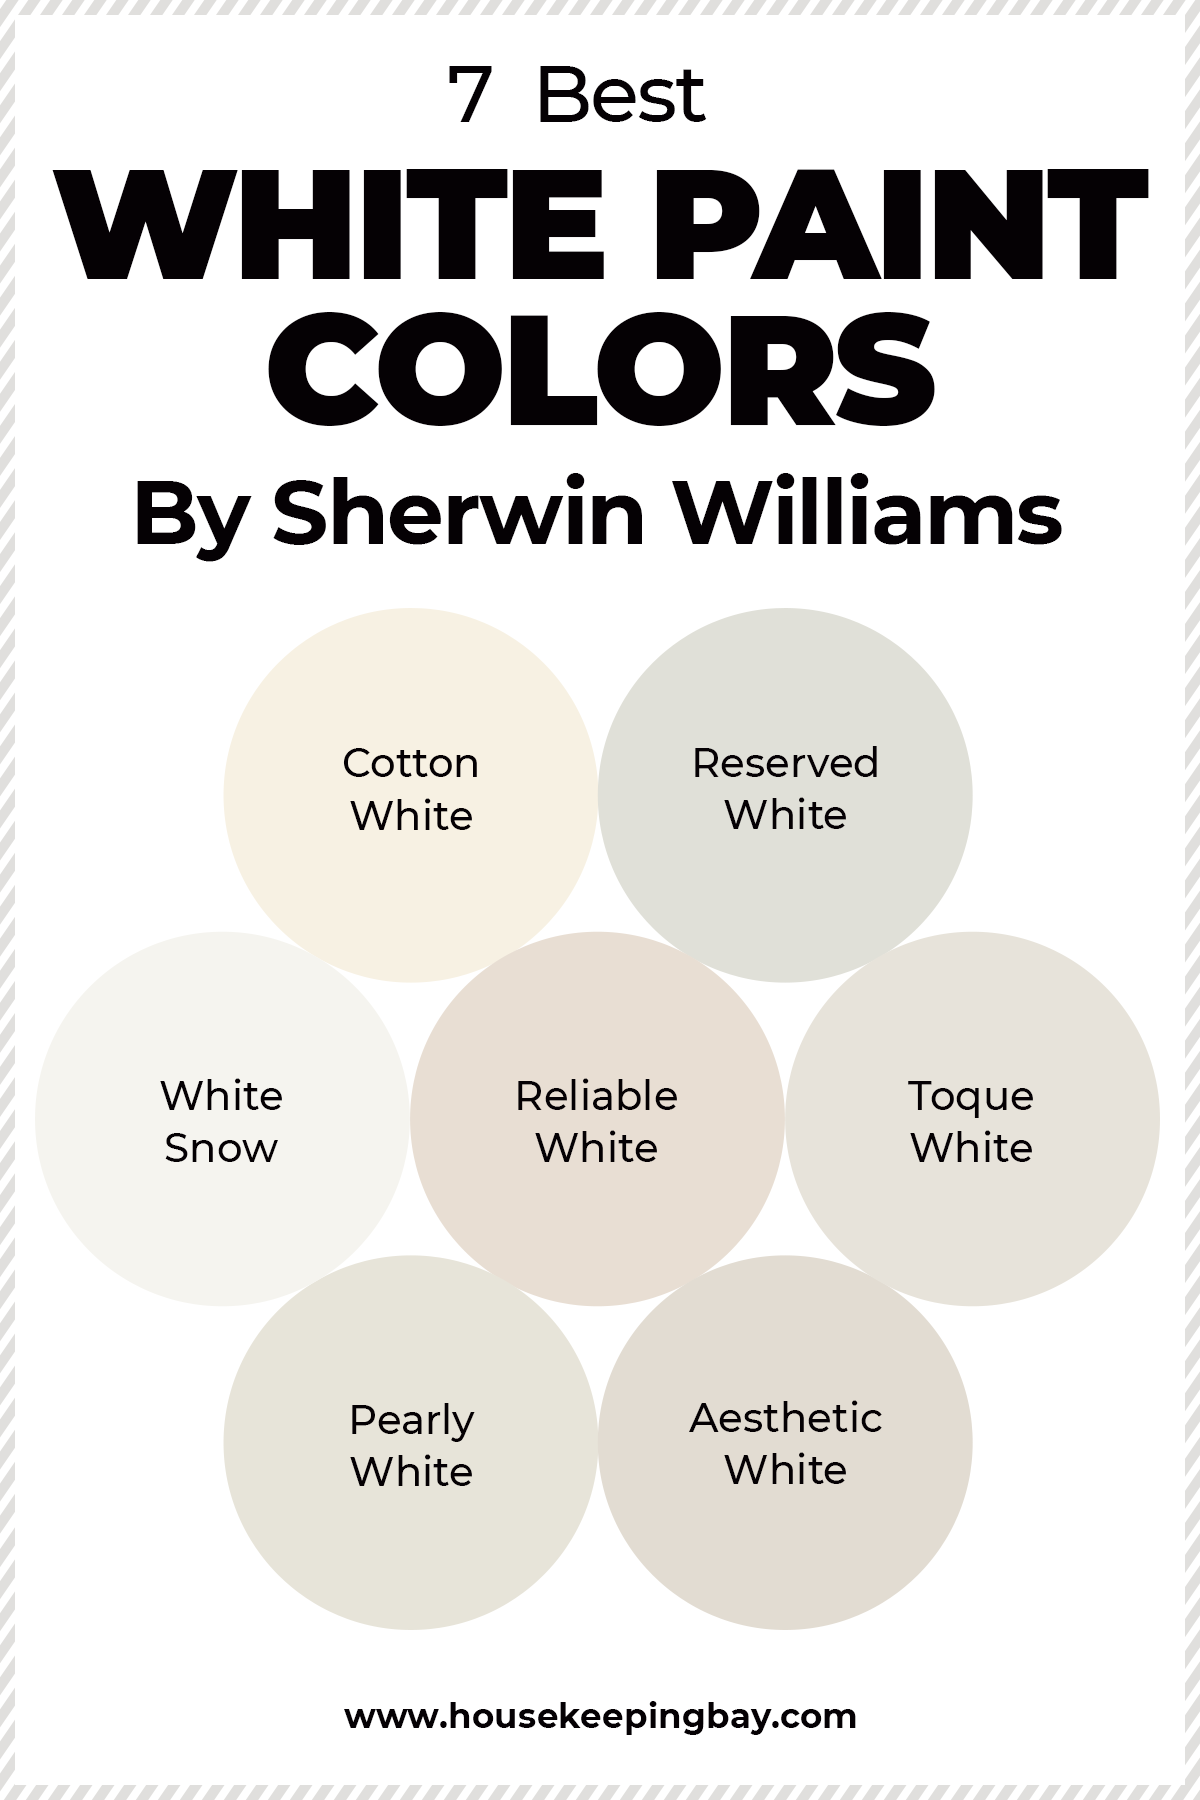 7 Best White Paint Colors by Sherwin Williams